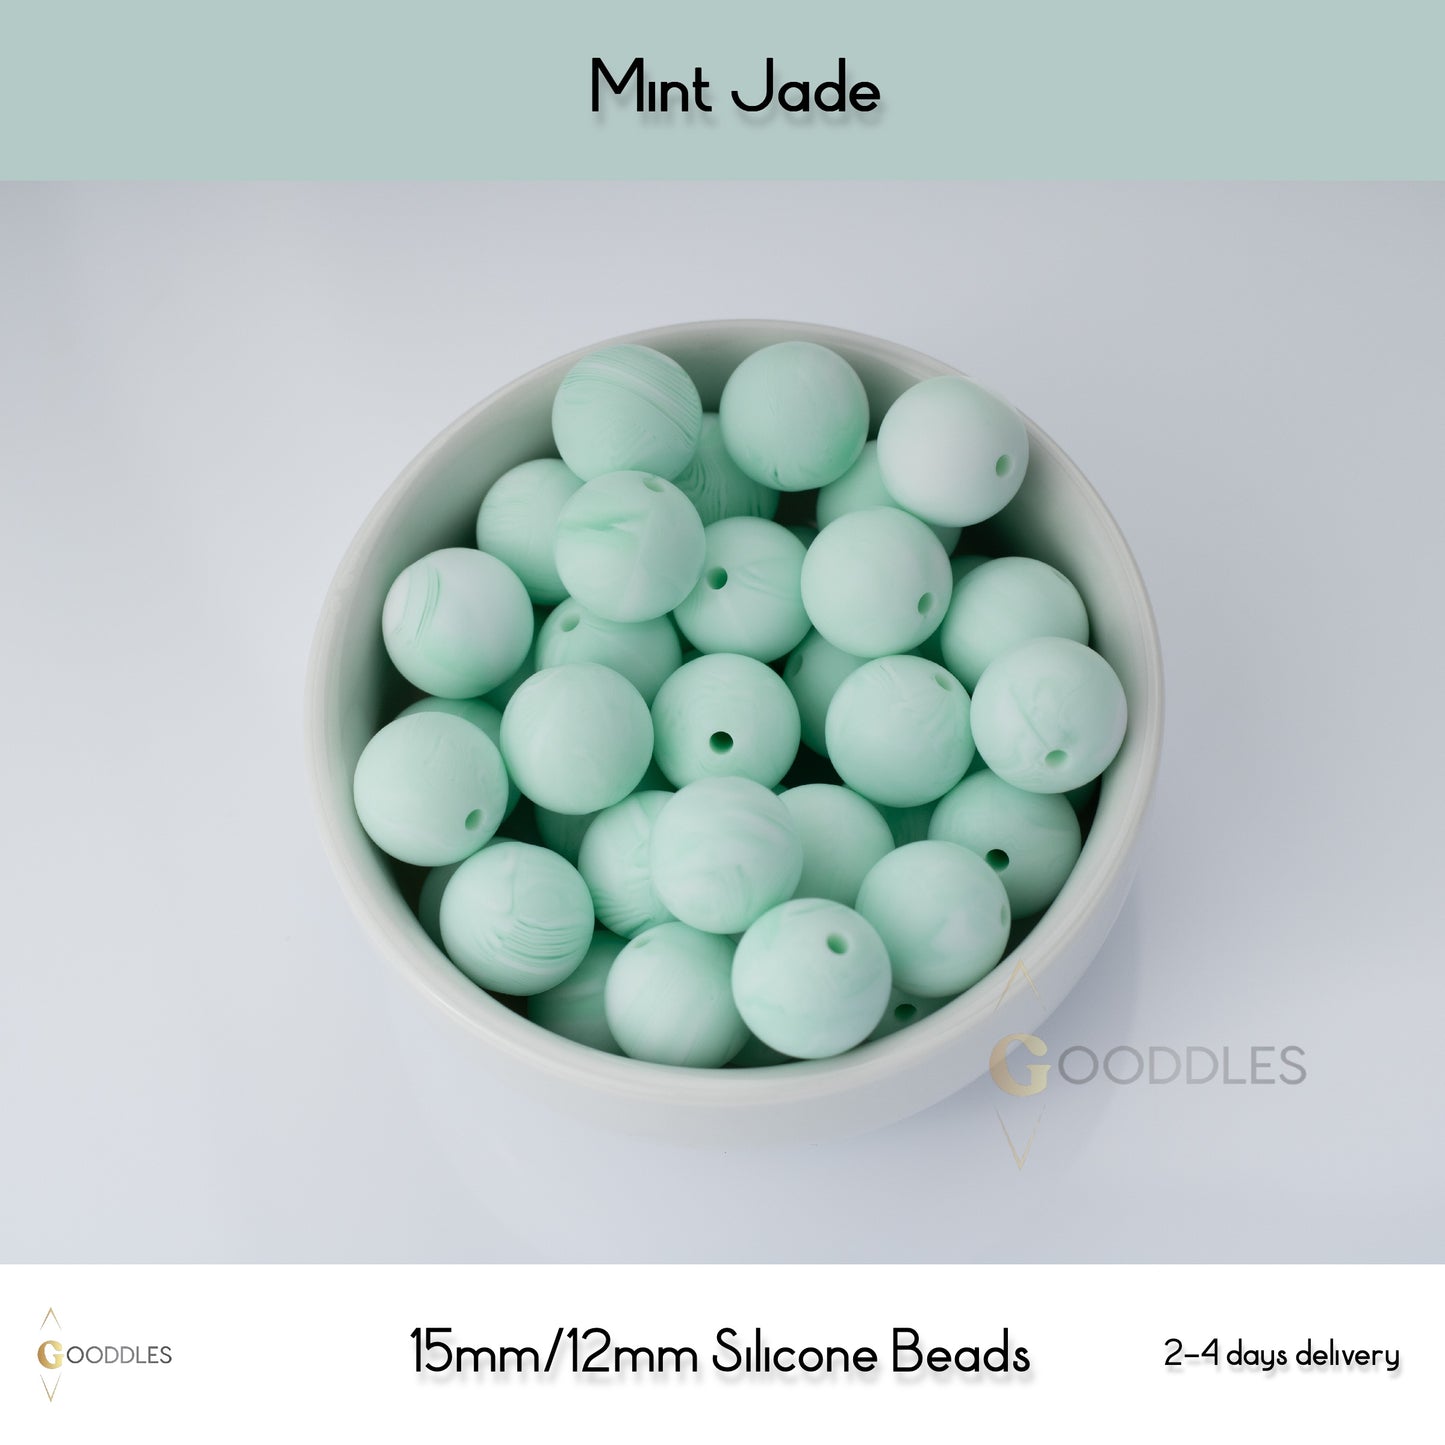 5pcs, Mint Jade Silicone Beads Round Silicone Beads